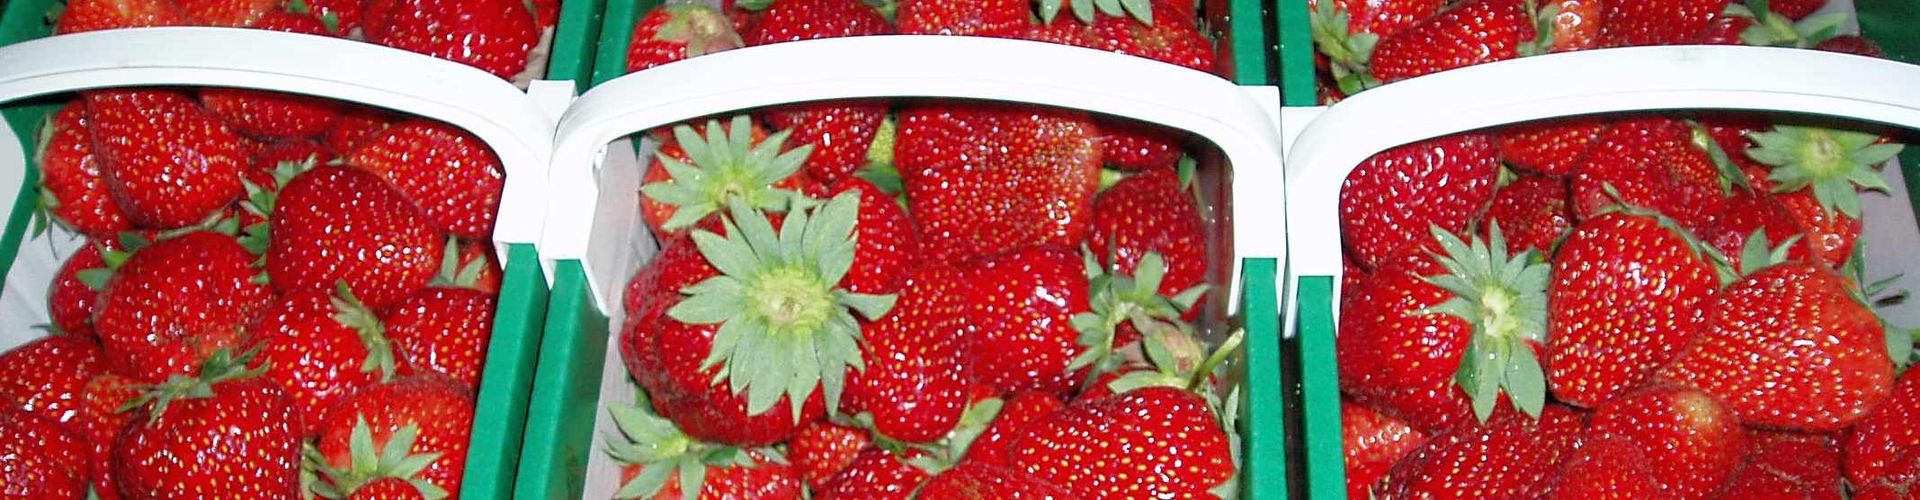 Strawberry varieties direct selling